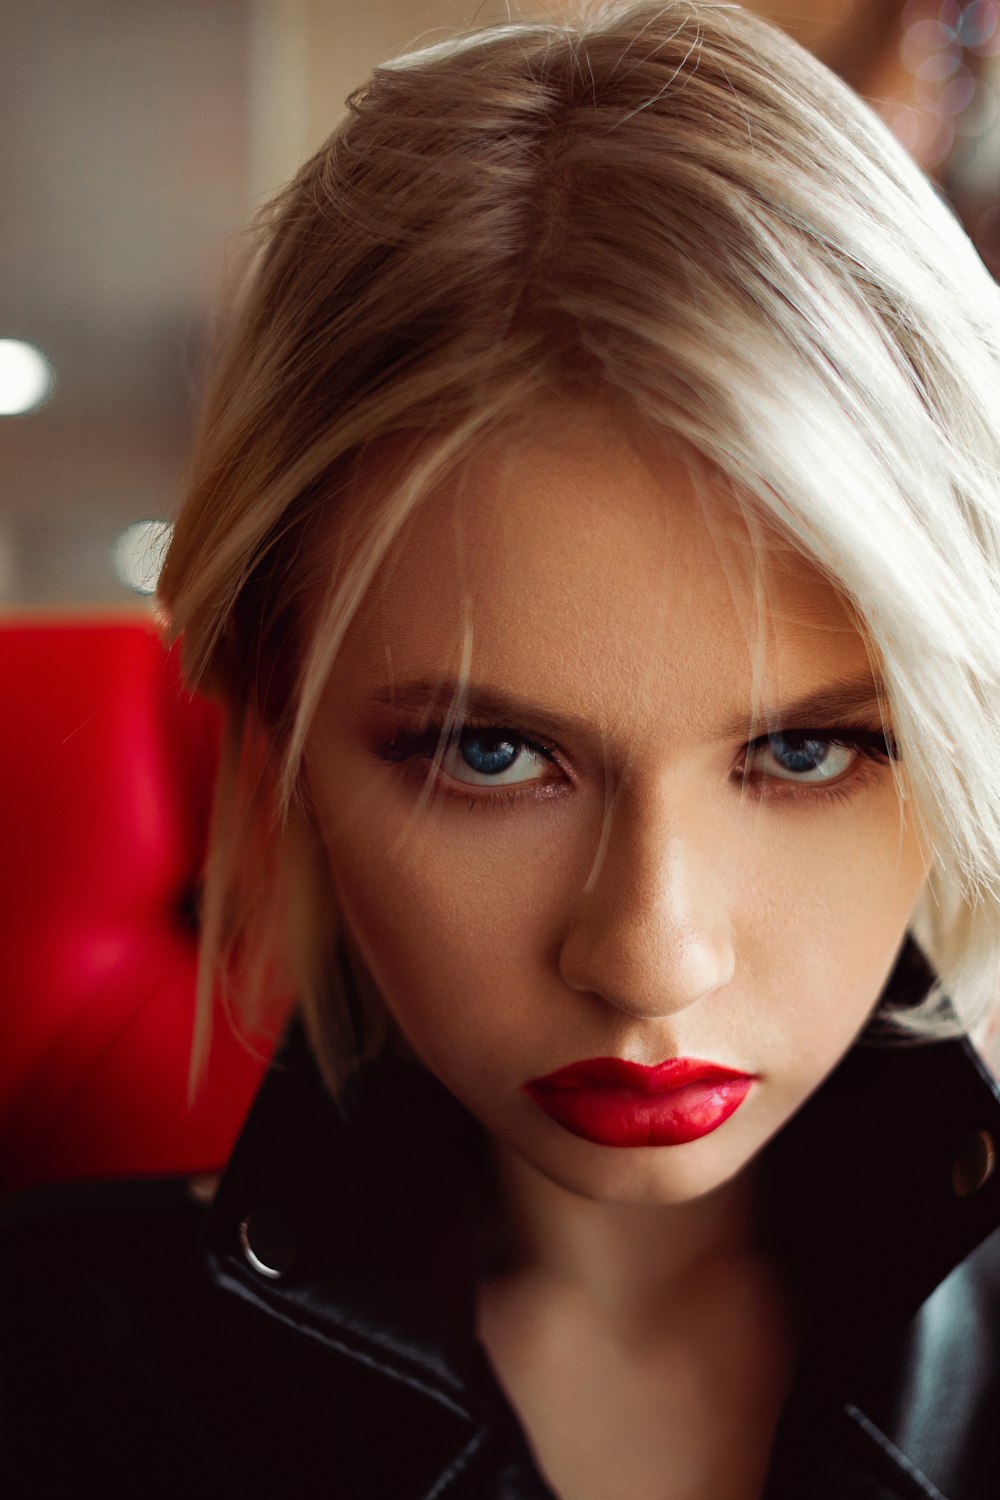 with hair wearing red photo – Free Red lips Image on Unsplash